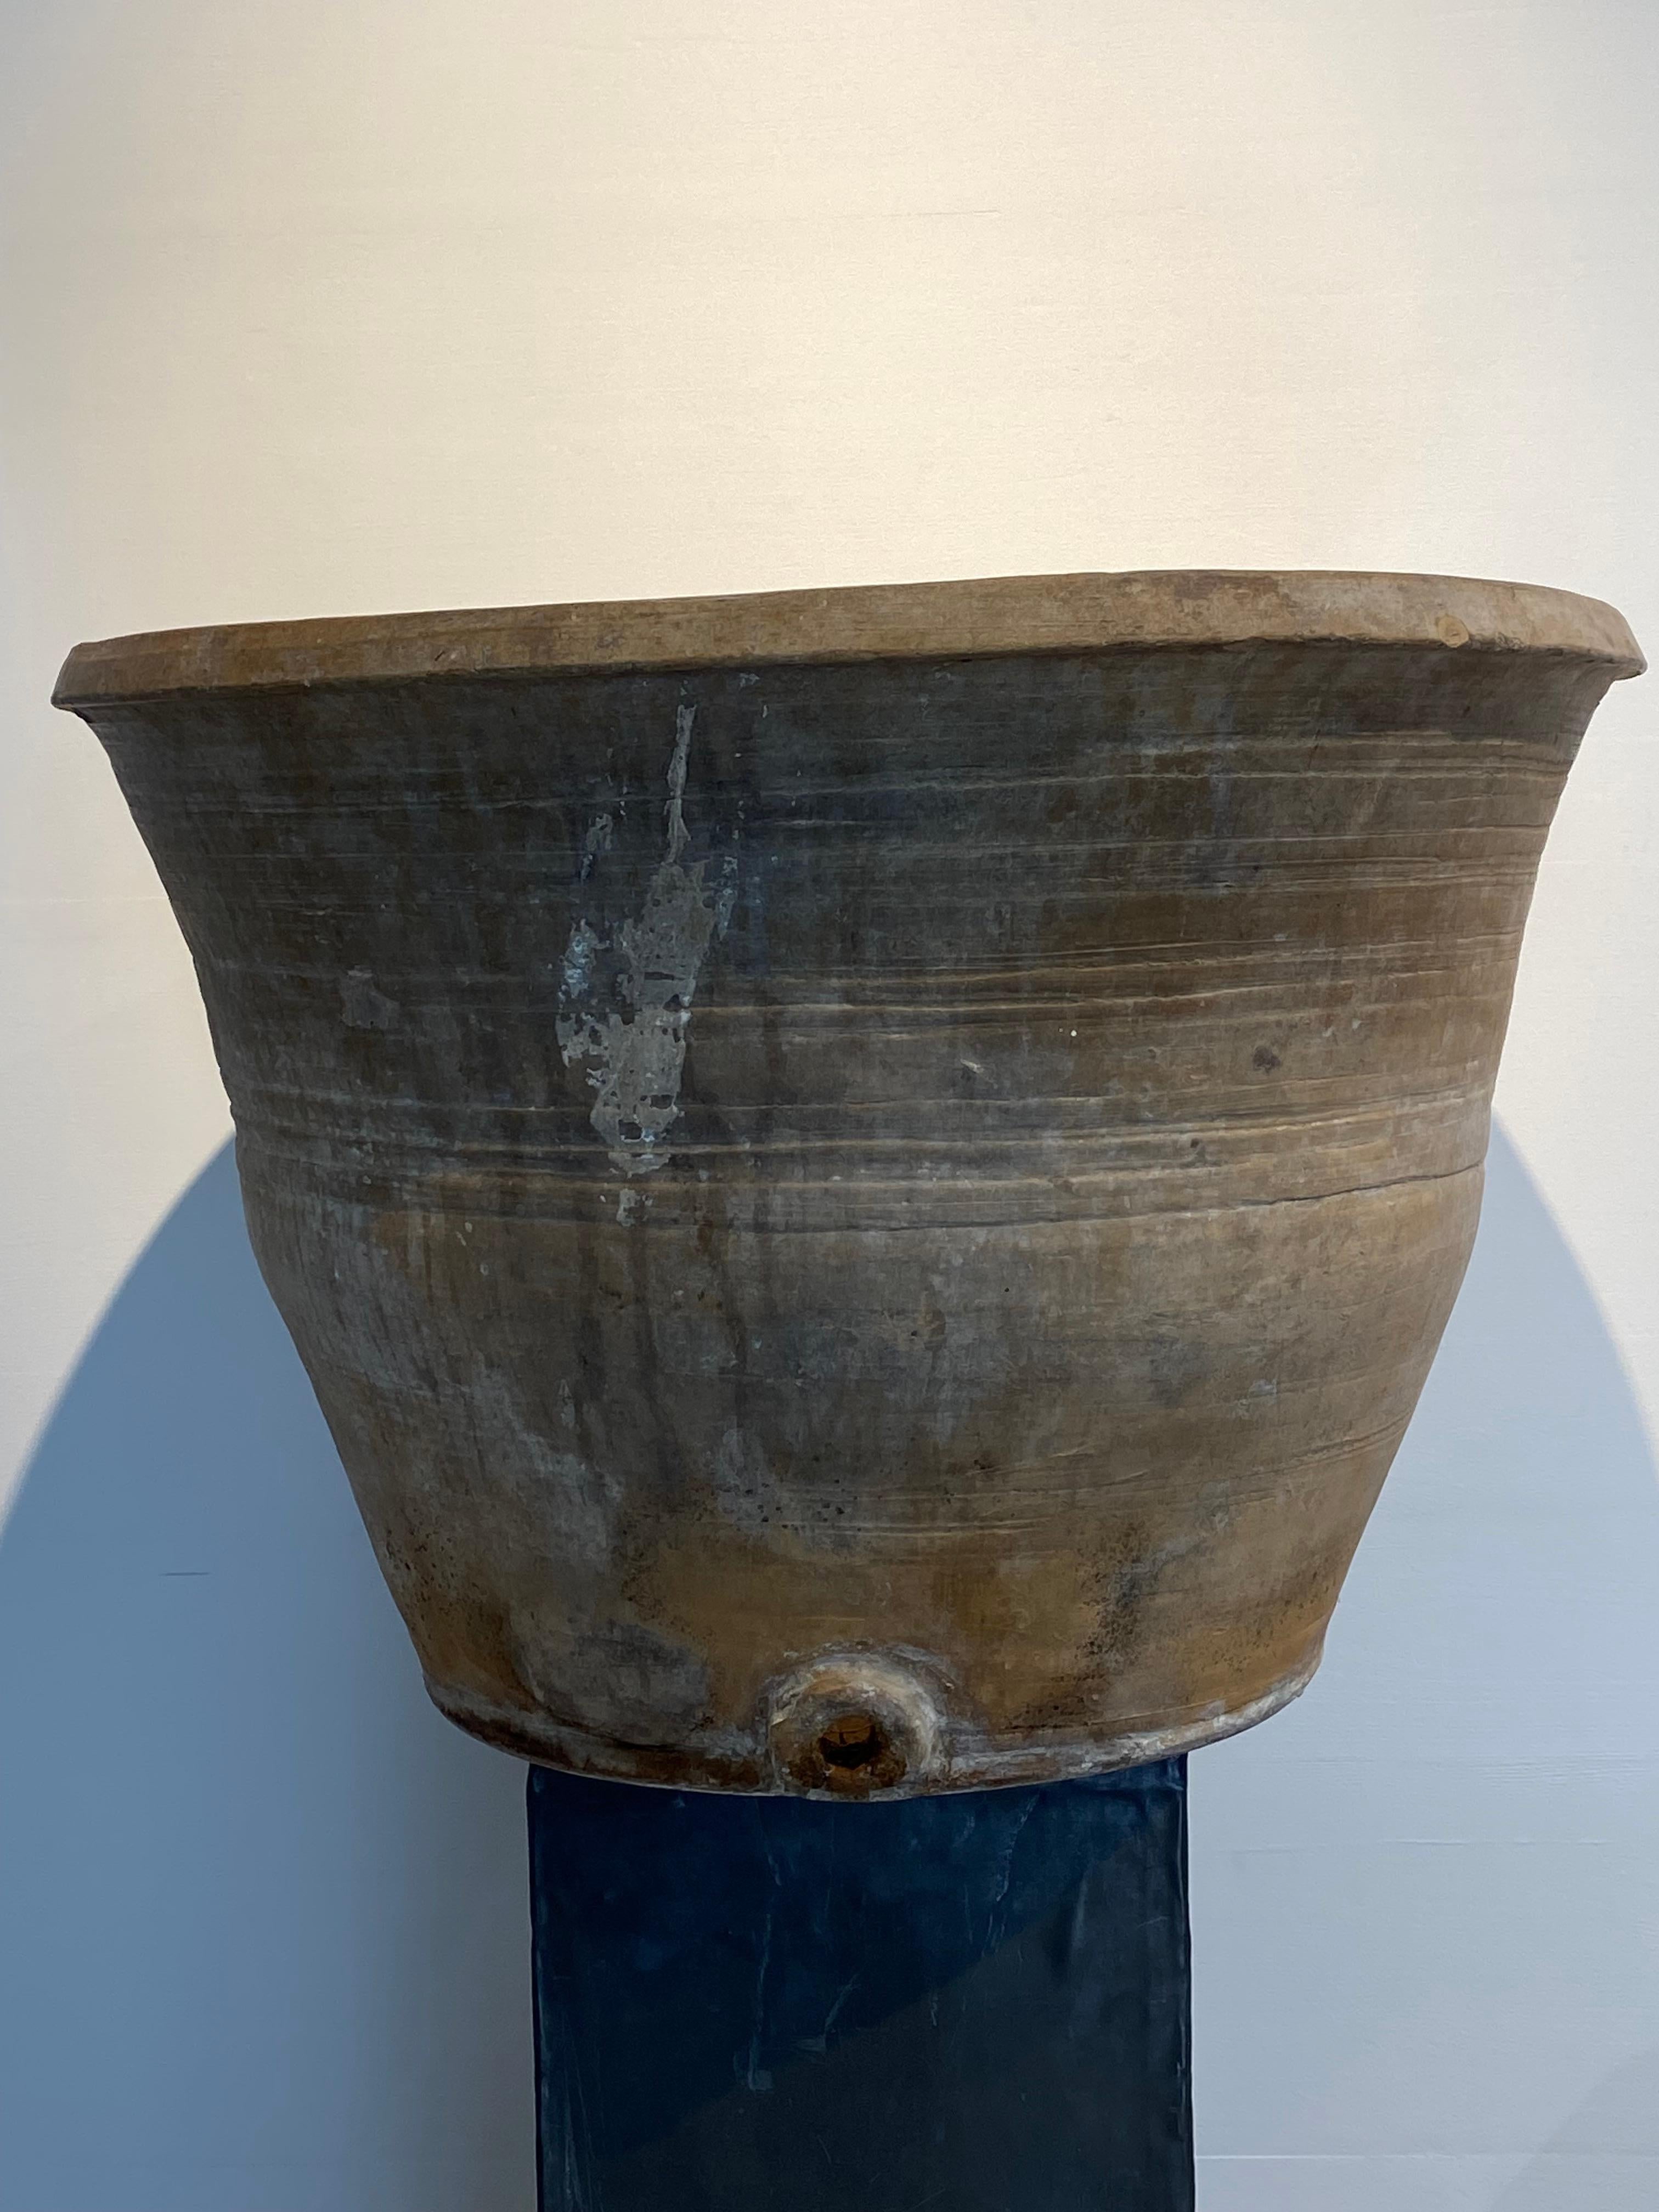 Exceptional Antique Spanish Terracotta Pot used for producing Olive oil,
the pot has an exceptional beautiful old patina and shine,
there is also an opening for releasing the liquids,
powerful object,to be used for different purposes